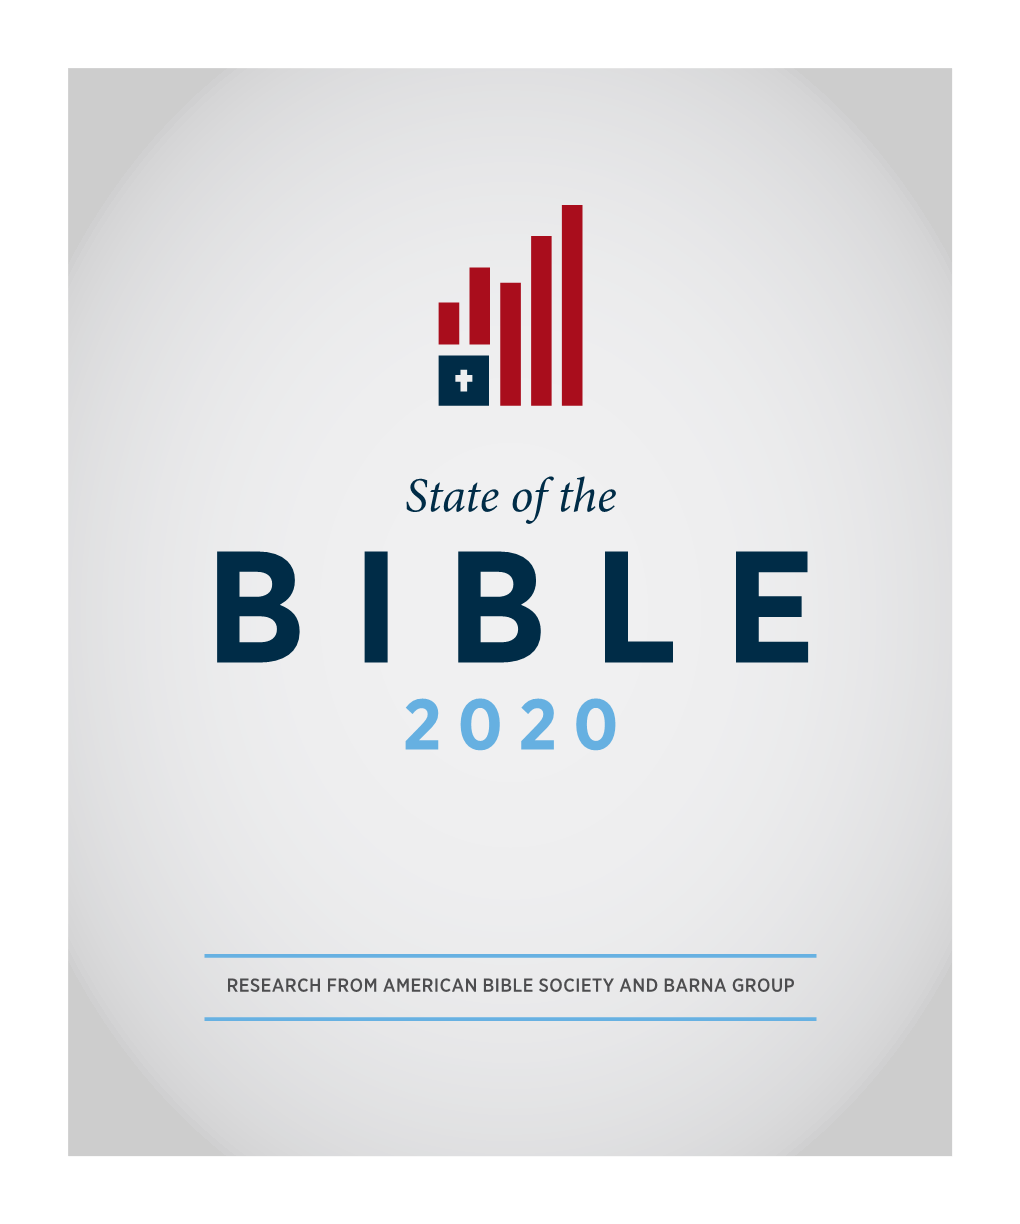 State of the BIBLE 2020